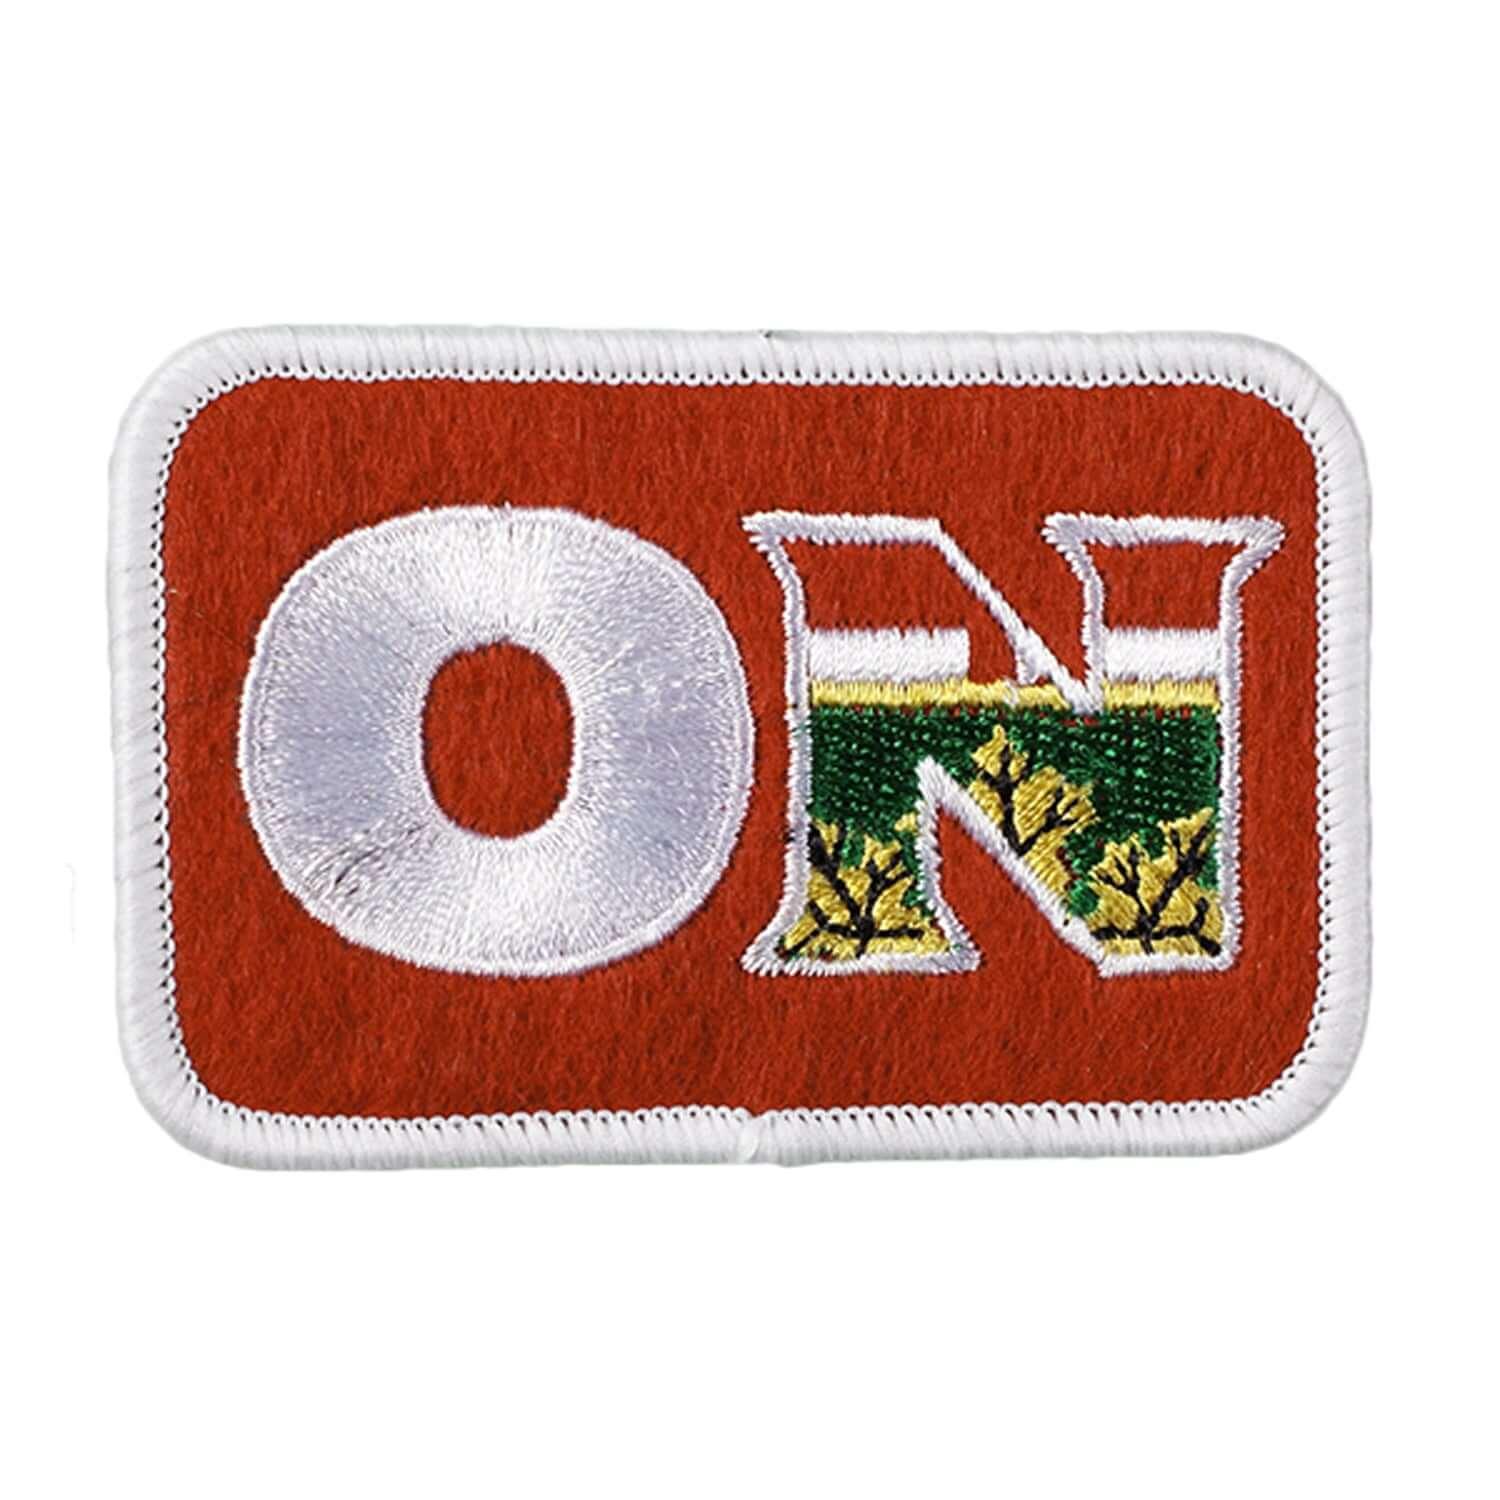 Ontario Province Proud Patch - Rocket Factory Apparel